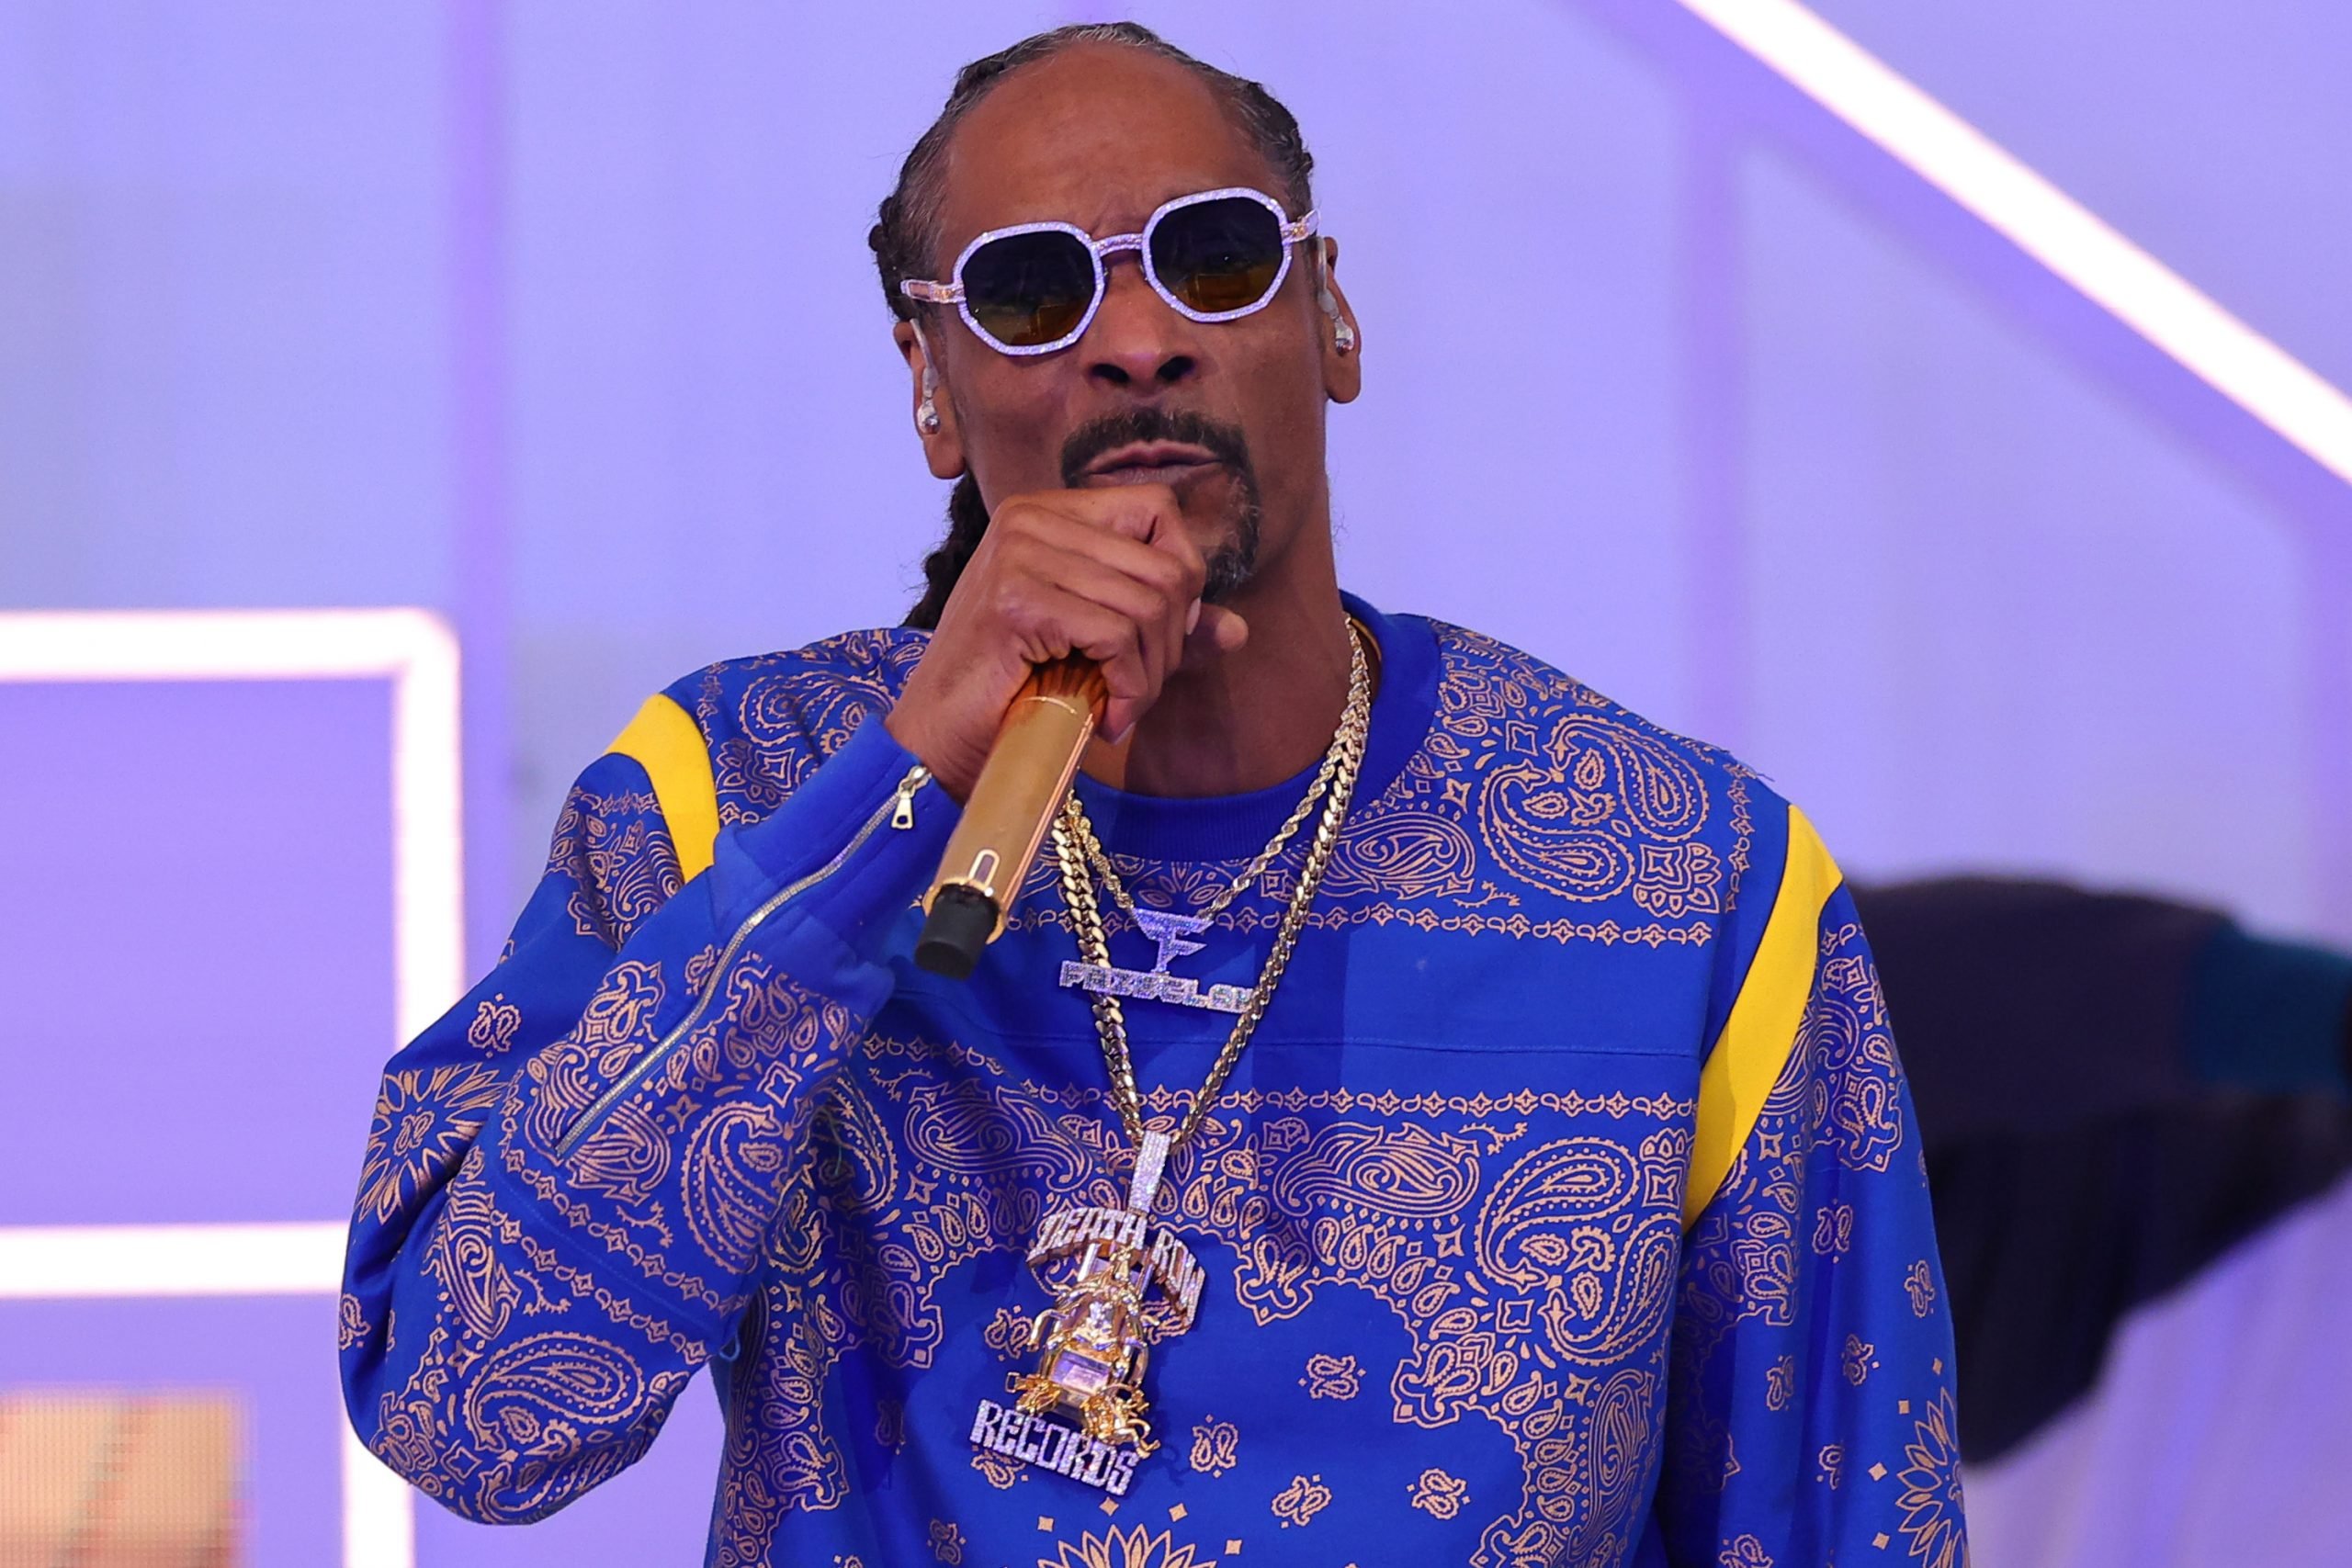 Snoop Dogg Included Gang References In His Super Bowl Halftime Show  Performance